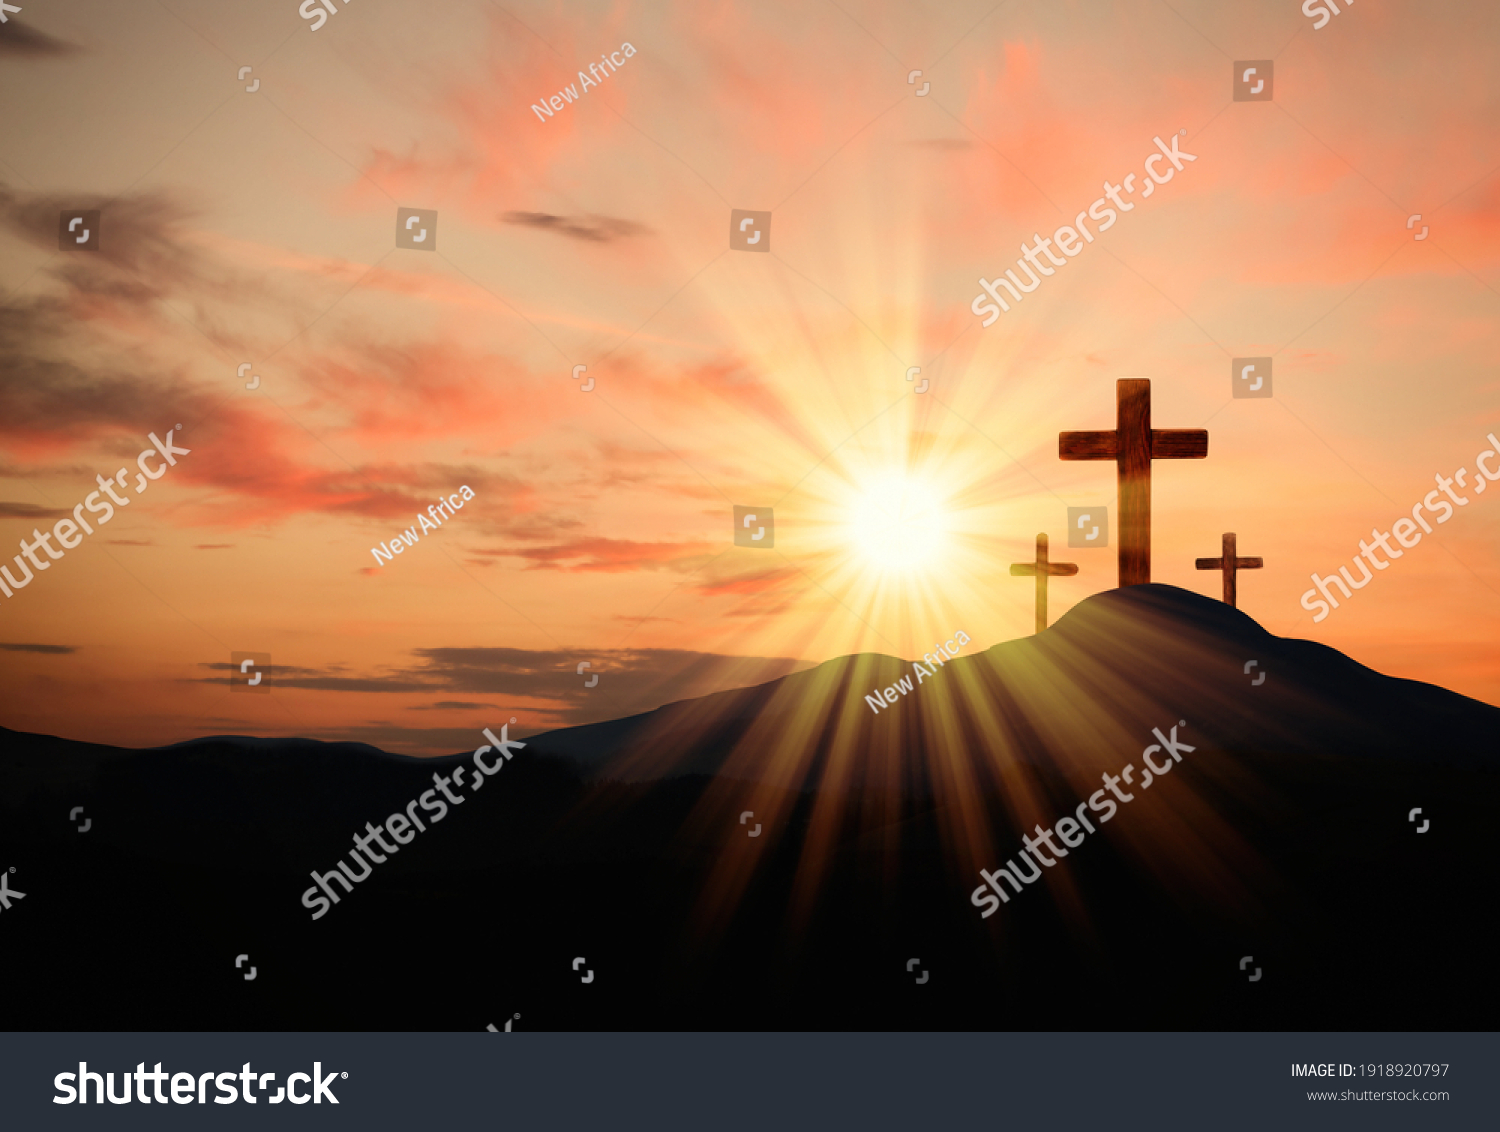 Christian crosses on hill outdoors at sunset.  Crucifixion Of Jesus #1918920797